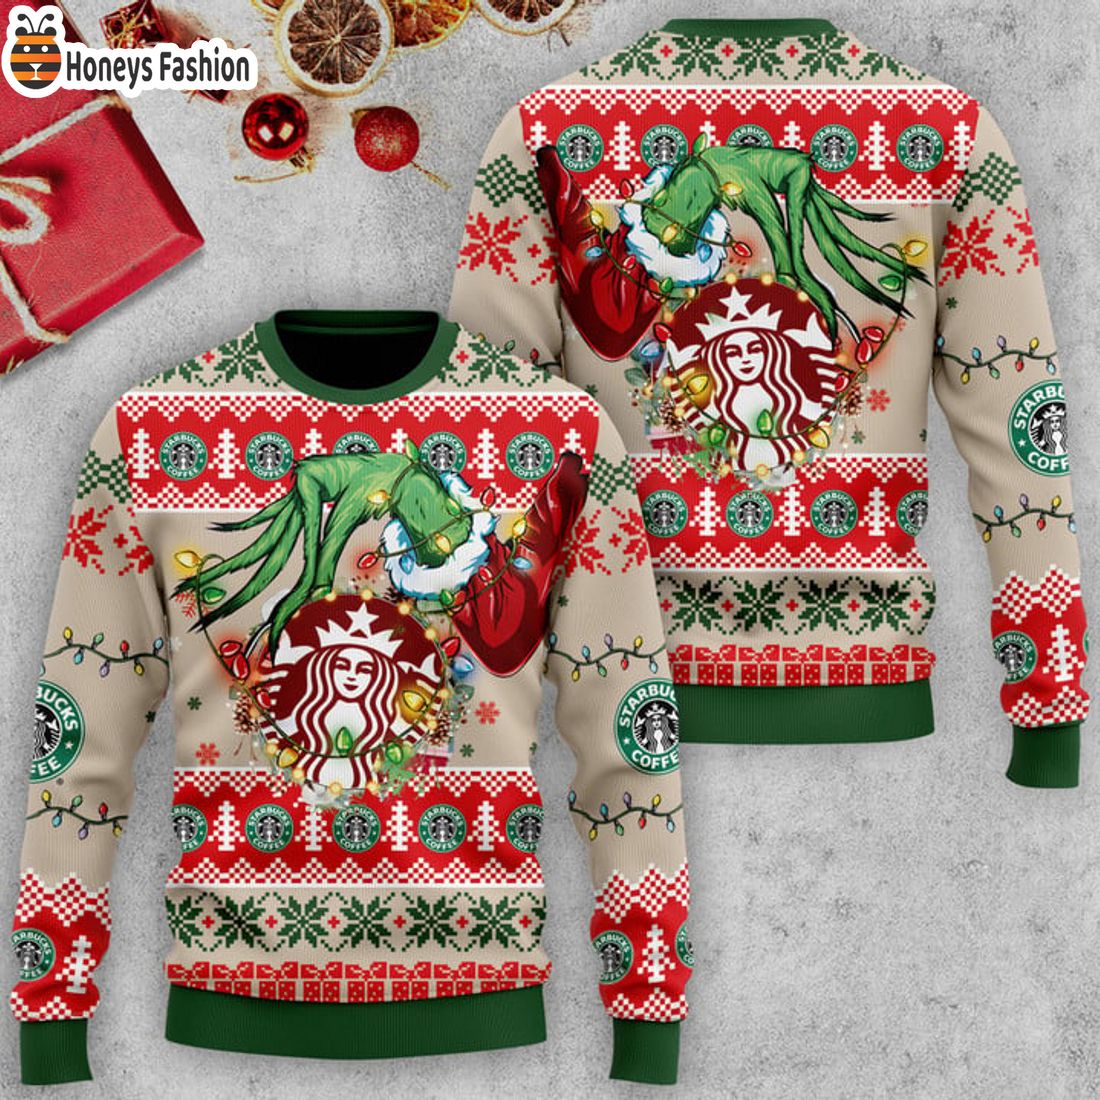 TRENDING Starbucks x The Grinch Ugly Christmas Sweater